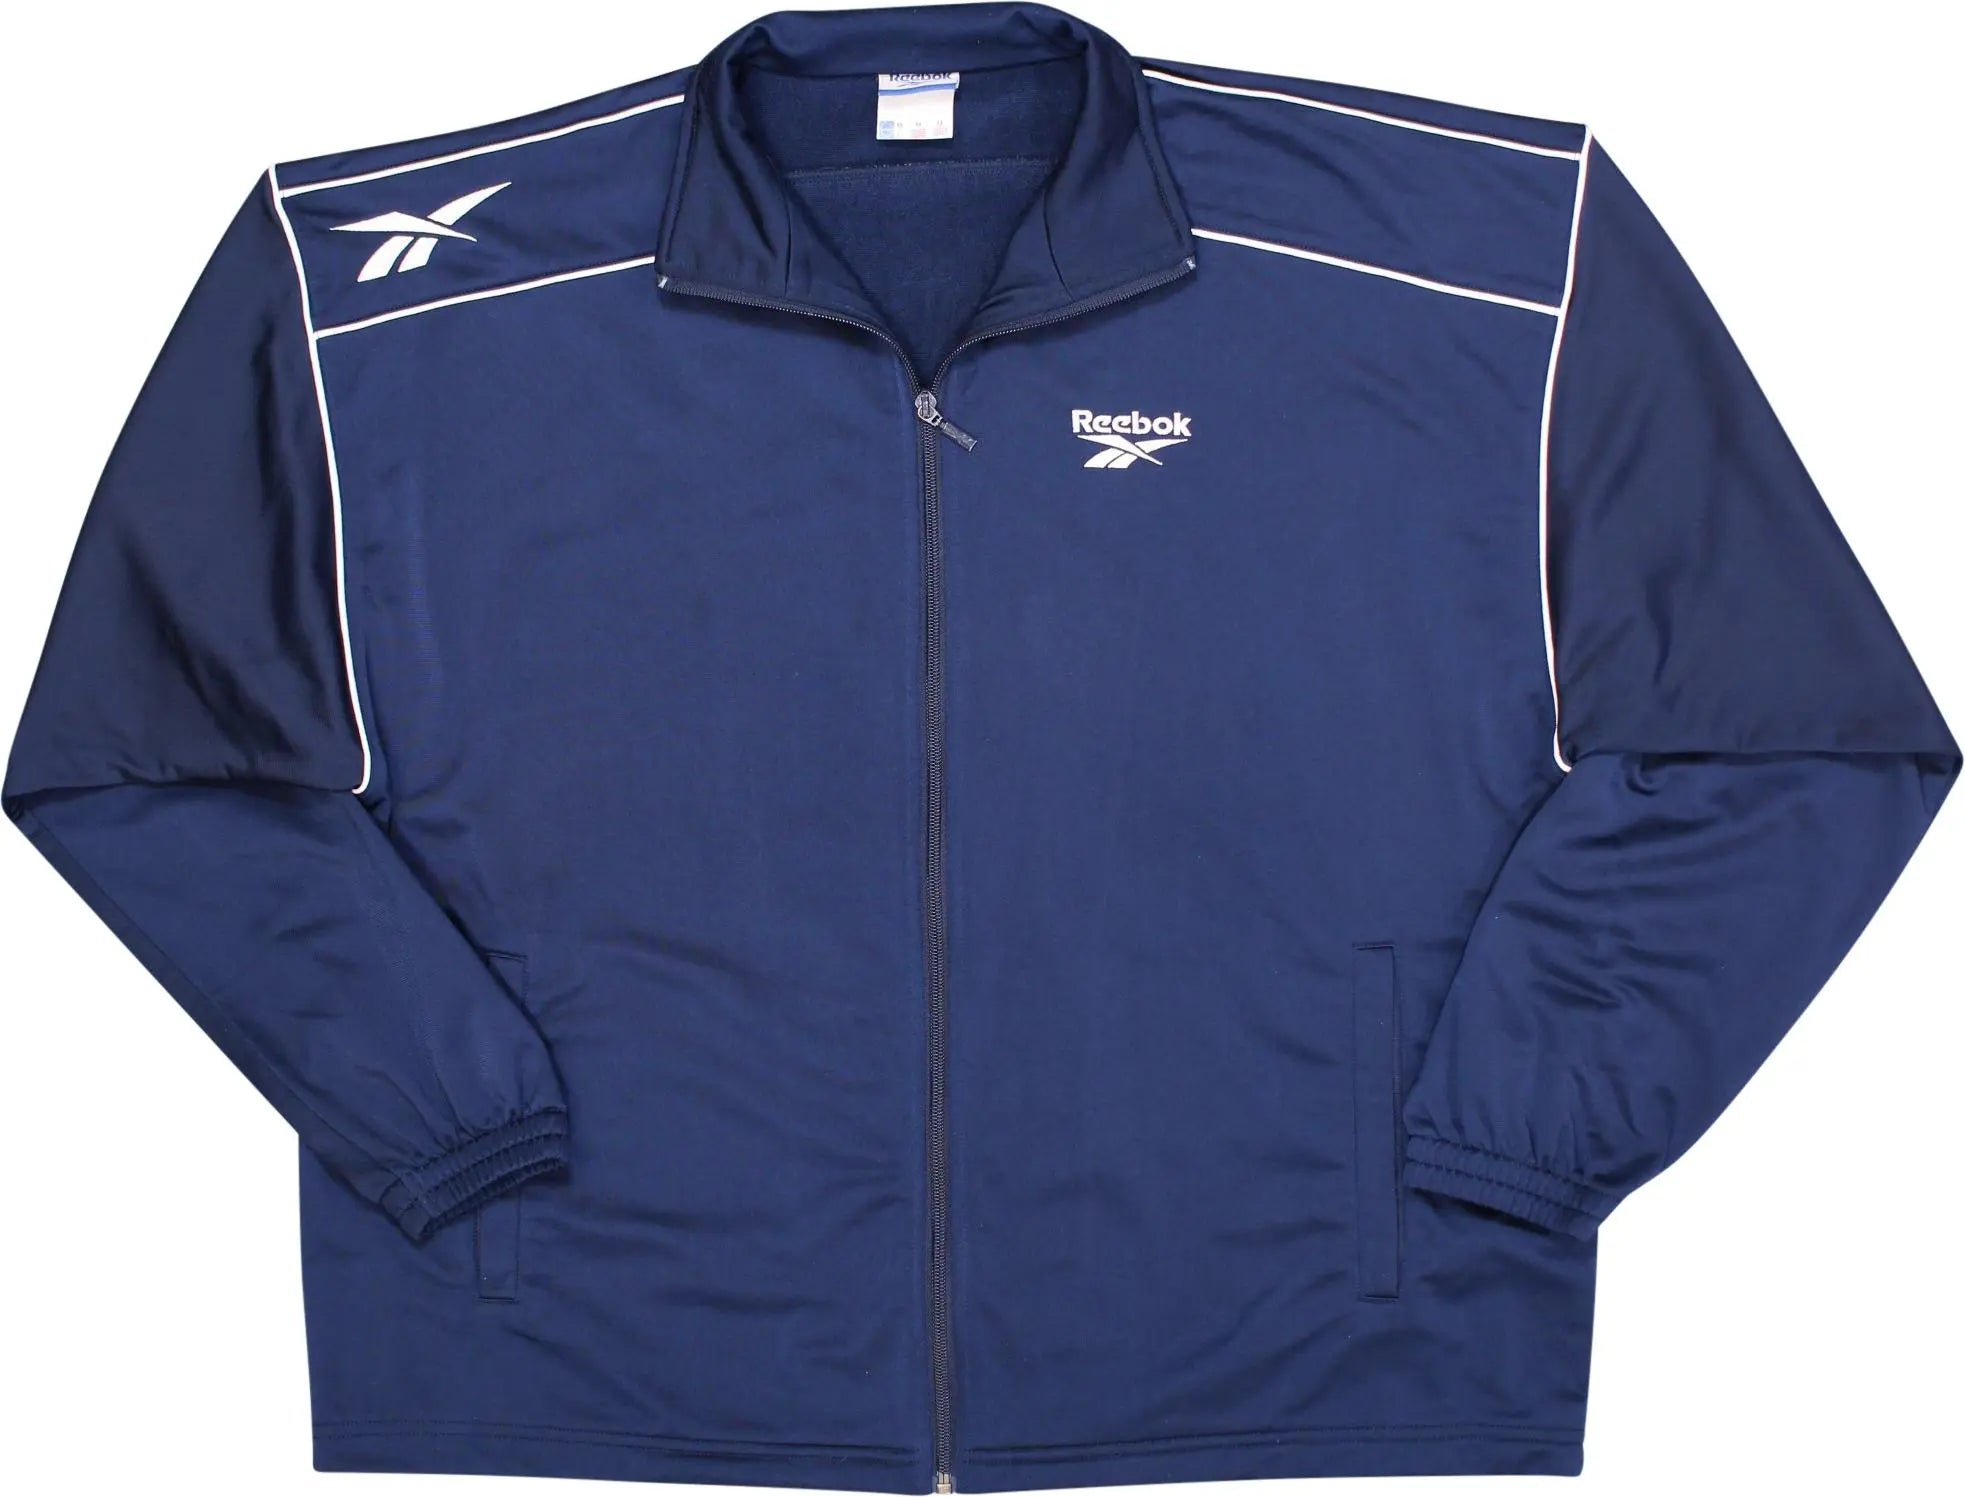 Reebok - Blue Track Jacket by Reebok- ThriftTale.com - Vintage and second handclothing